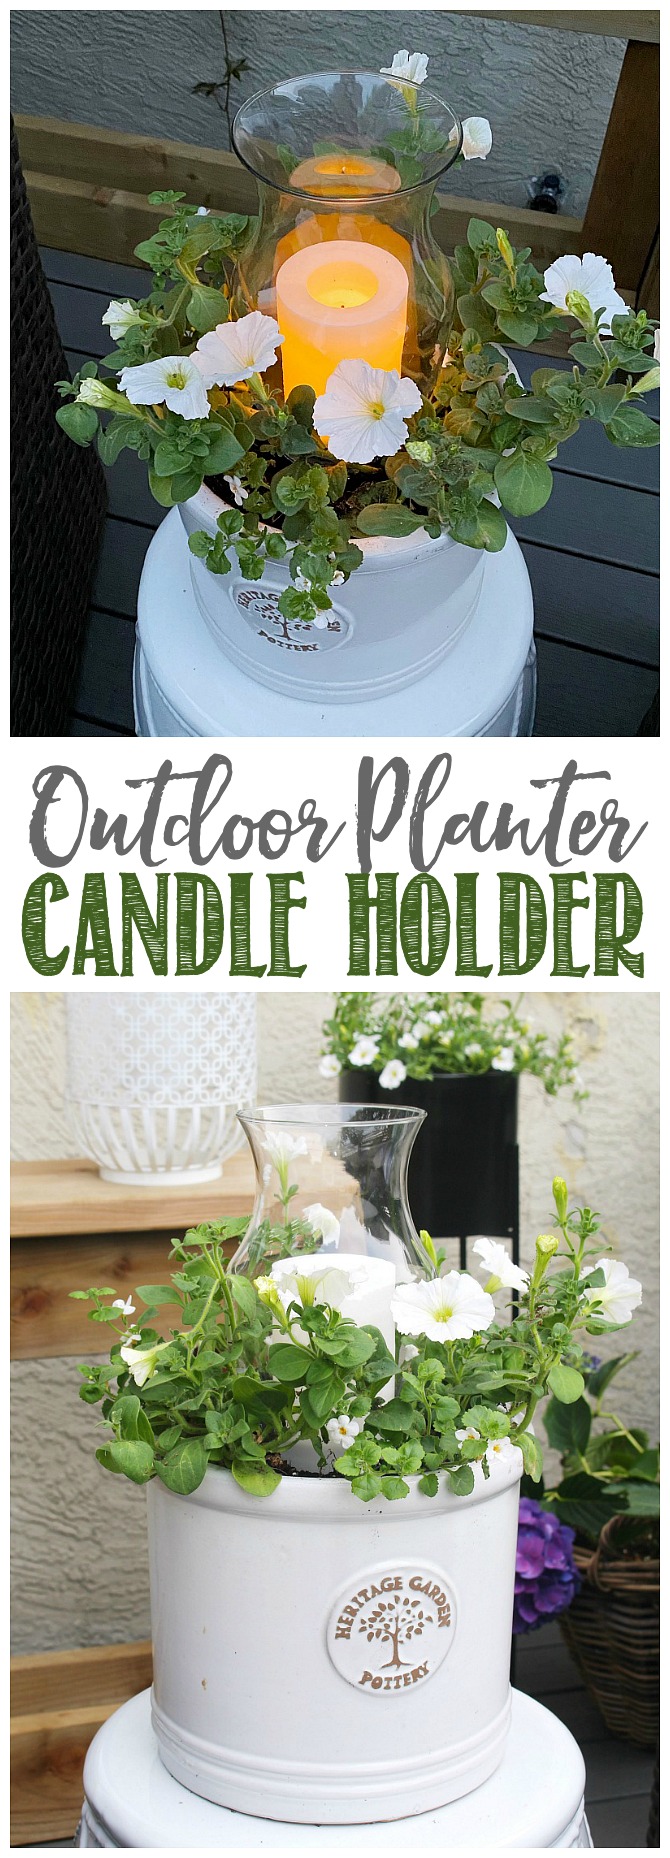 Easy DIY outdoor planter with candle holder.